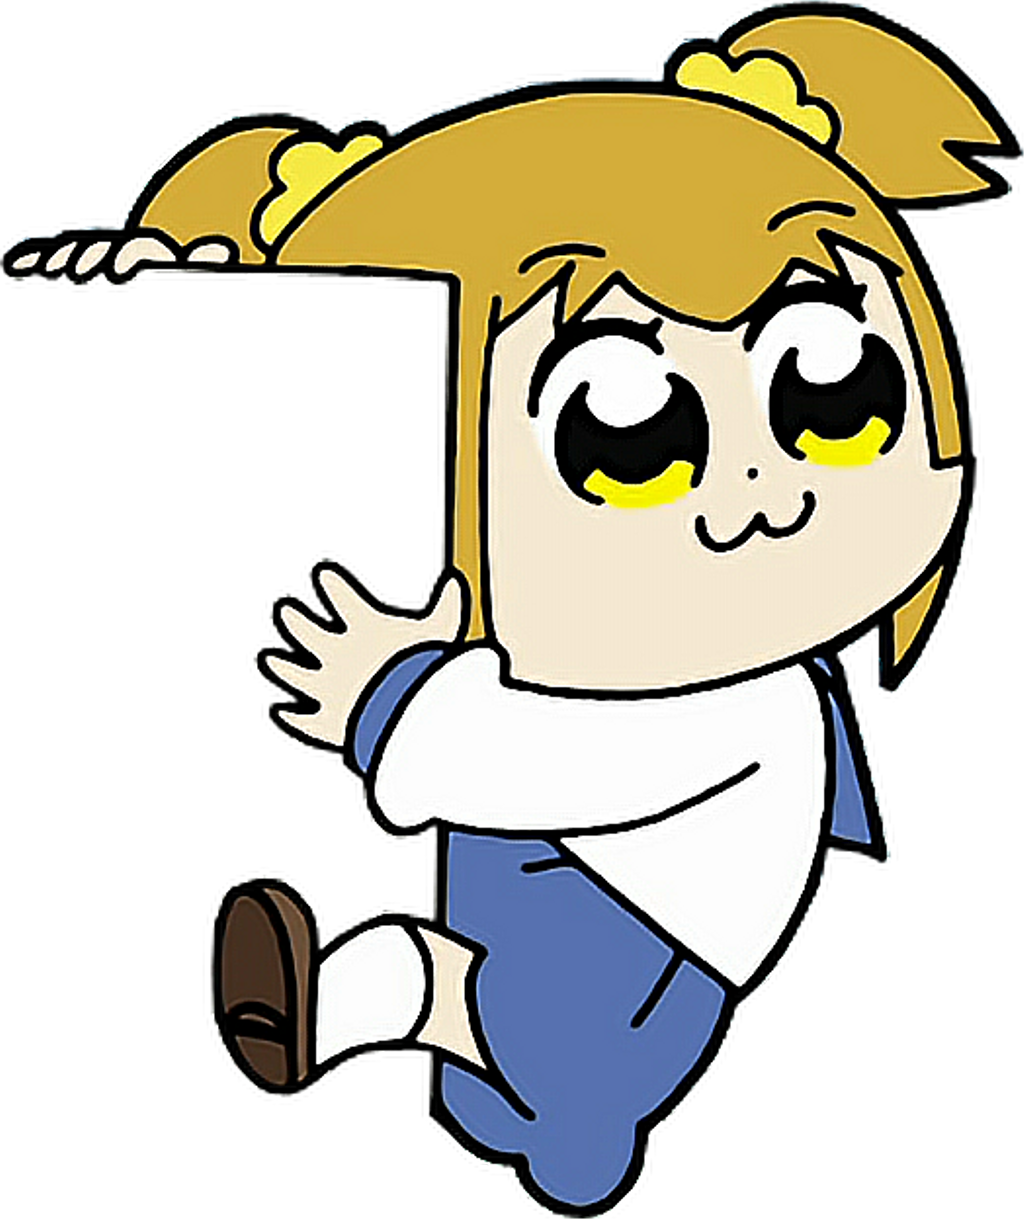 Download #popuko #popteamepic #anime #cute #freetoedit - Cartoon PNG Image  with No Background 